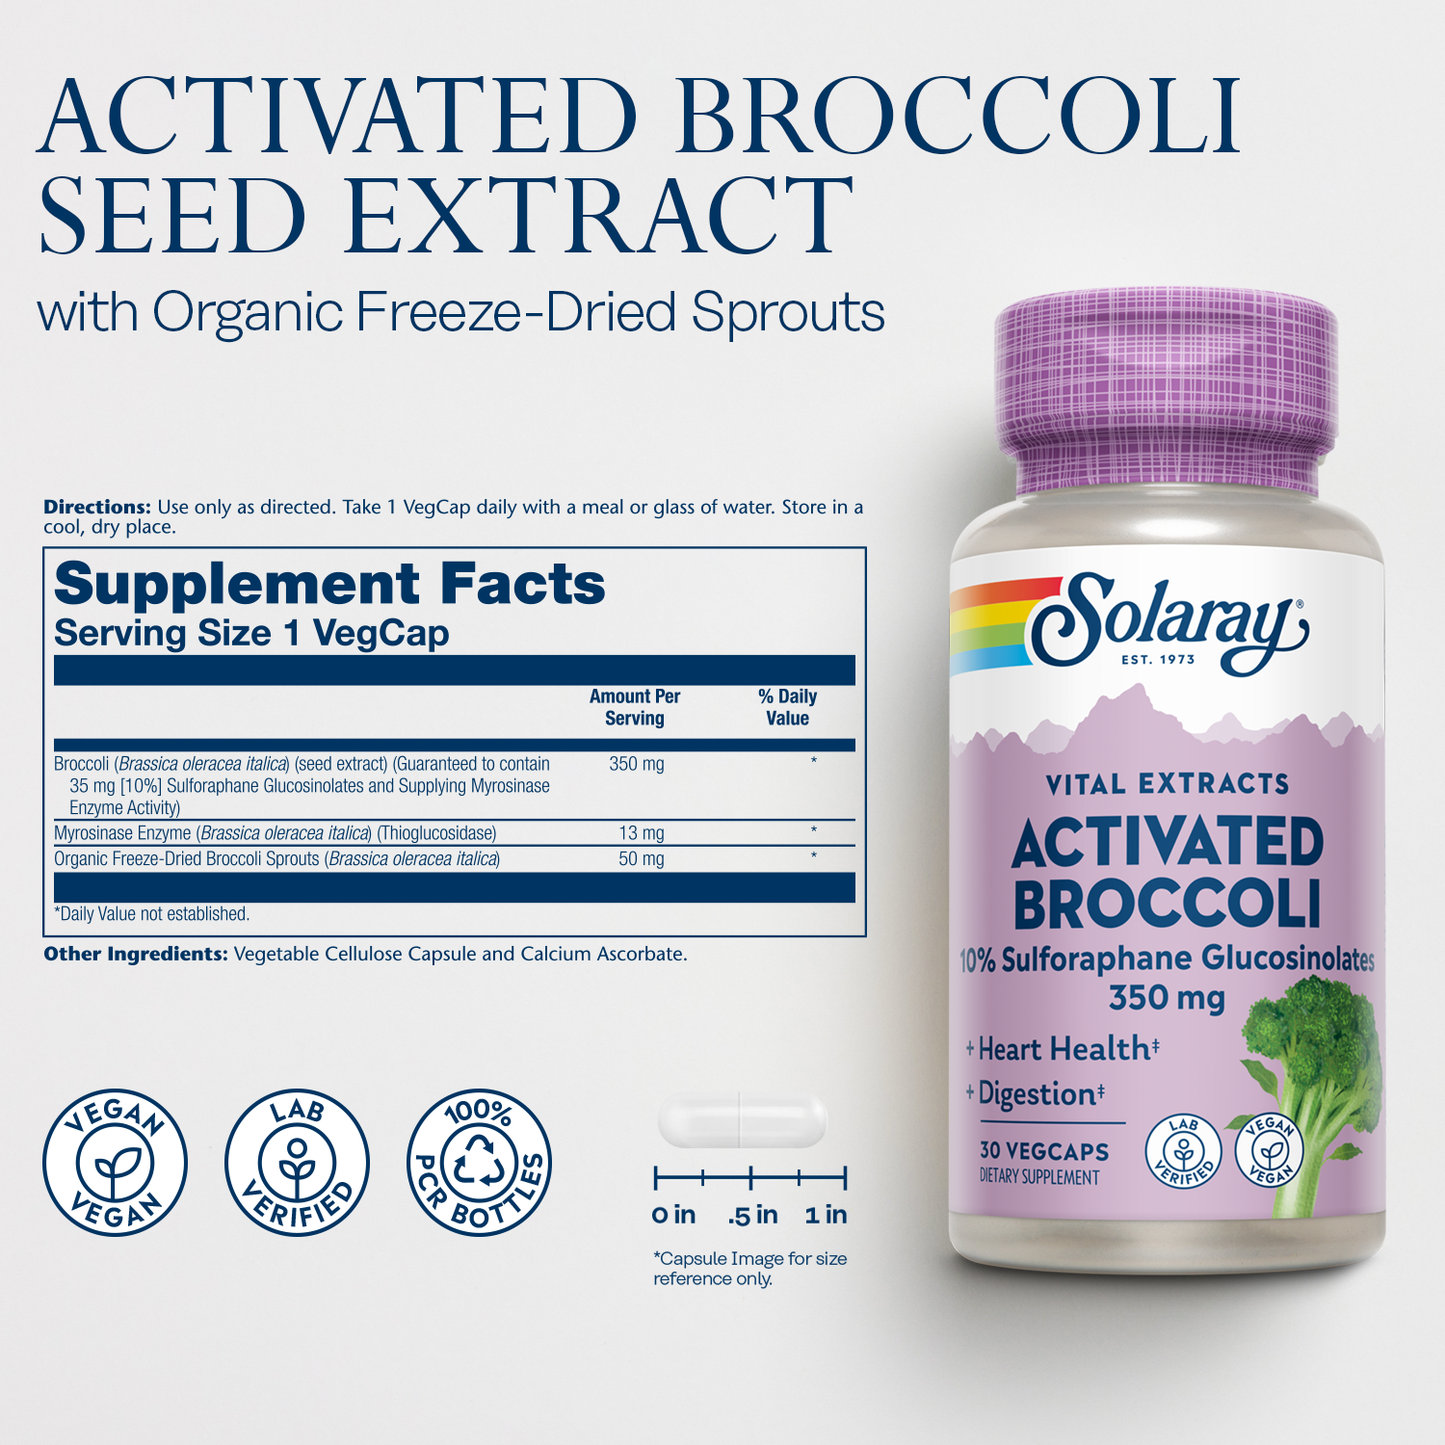 Solaray Activated Broccoli Seed Extract 350 mg, 10% Sulforaphane Glucosinolates for Antioxidant Support, Heart Health and Digestive Support, Vegan and Lab Verified, 30 Servings, 30 VegCaps